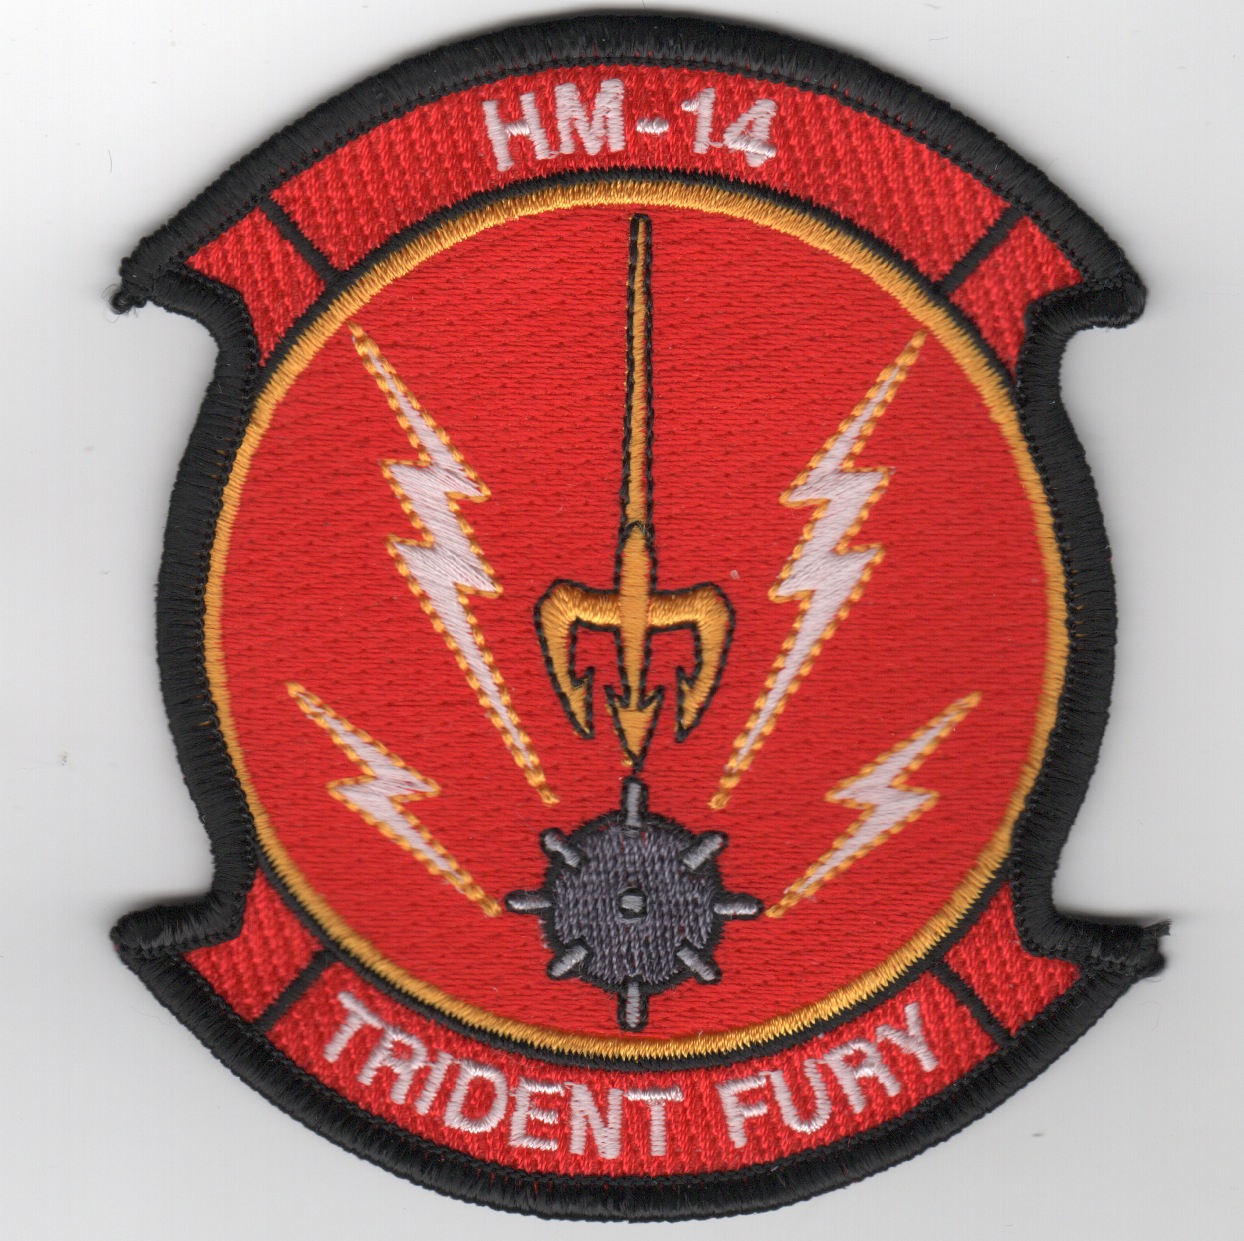 HM-14 'Trident Fury' Patch (Red)